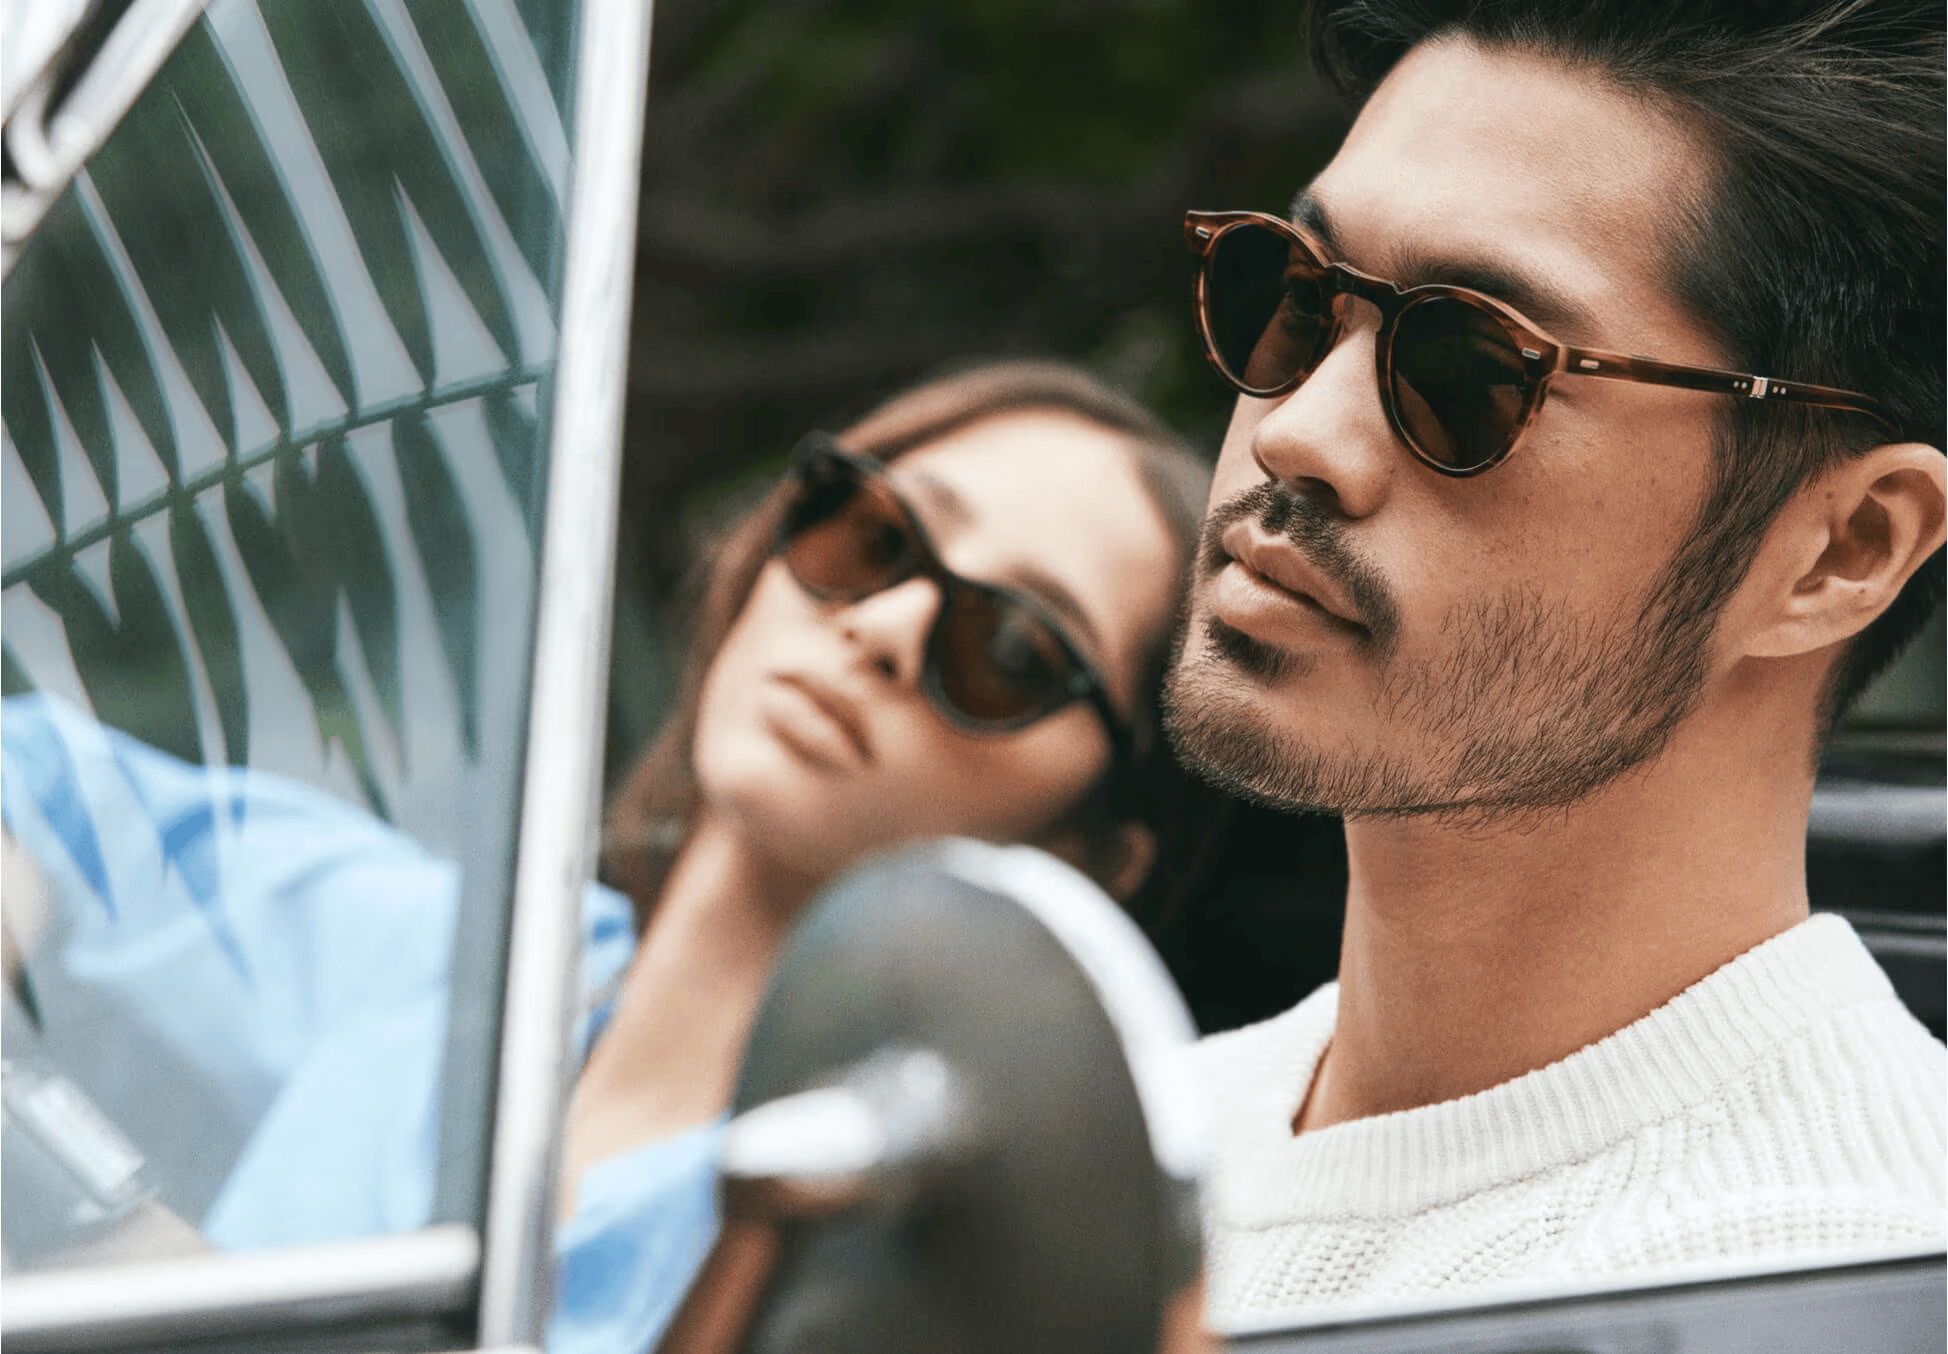 Oliver Peoples Sunglasses: The Epitome of Quiet Luxury – eye